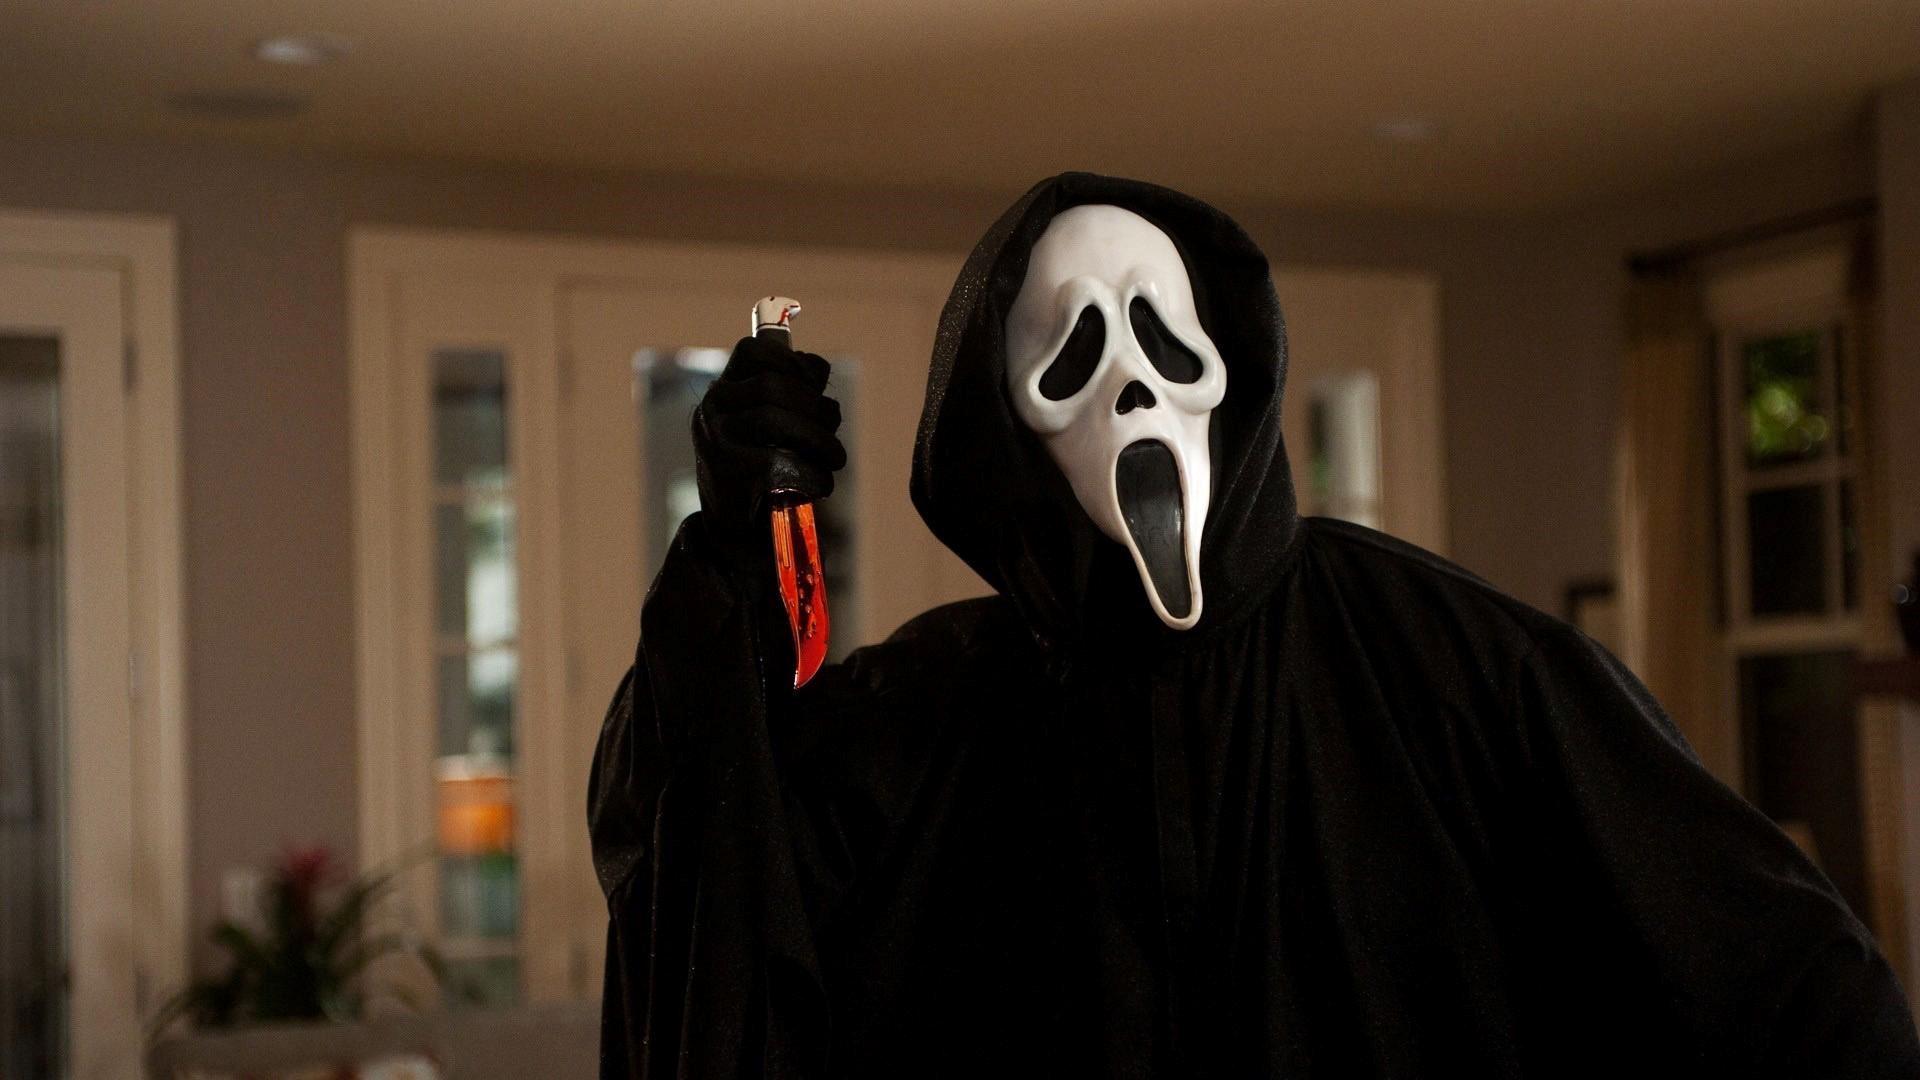 Ghostface from the Scream Movies Wallpaper HD Backgrounds